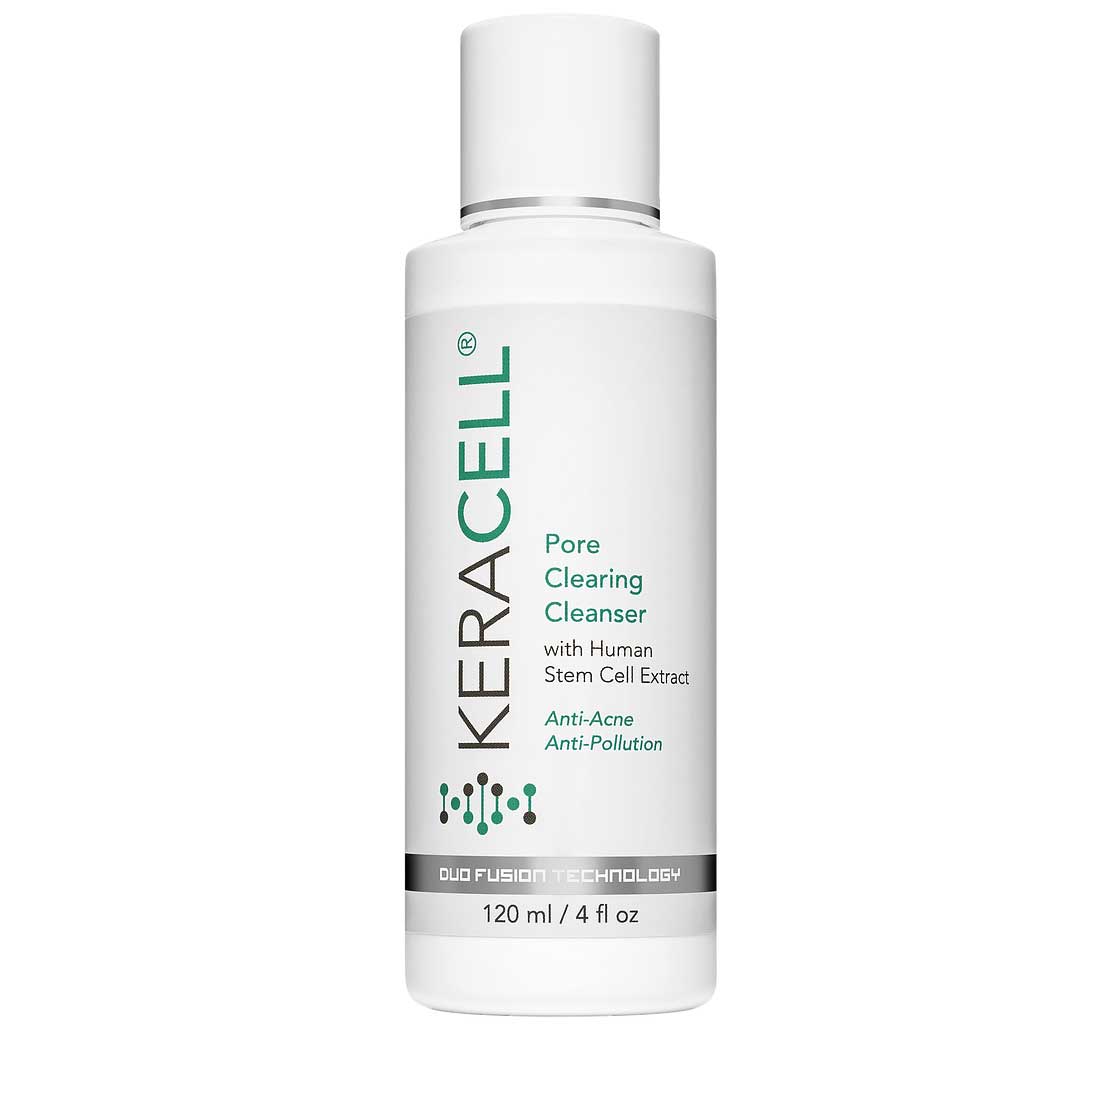 Pore Clearing Cleanser